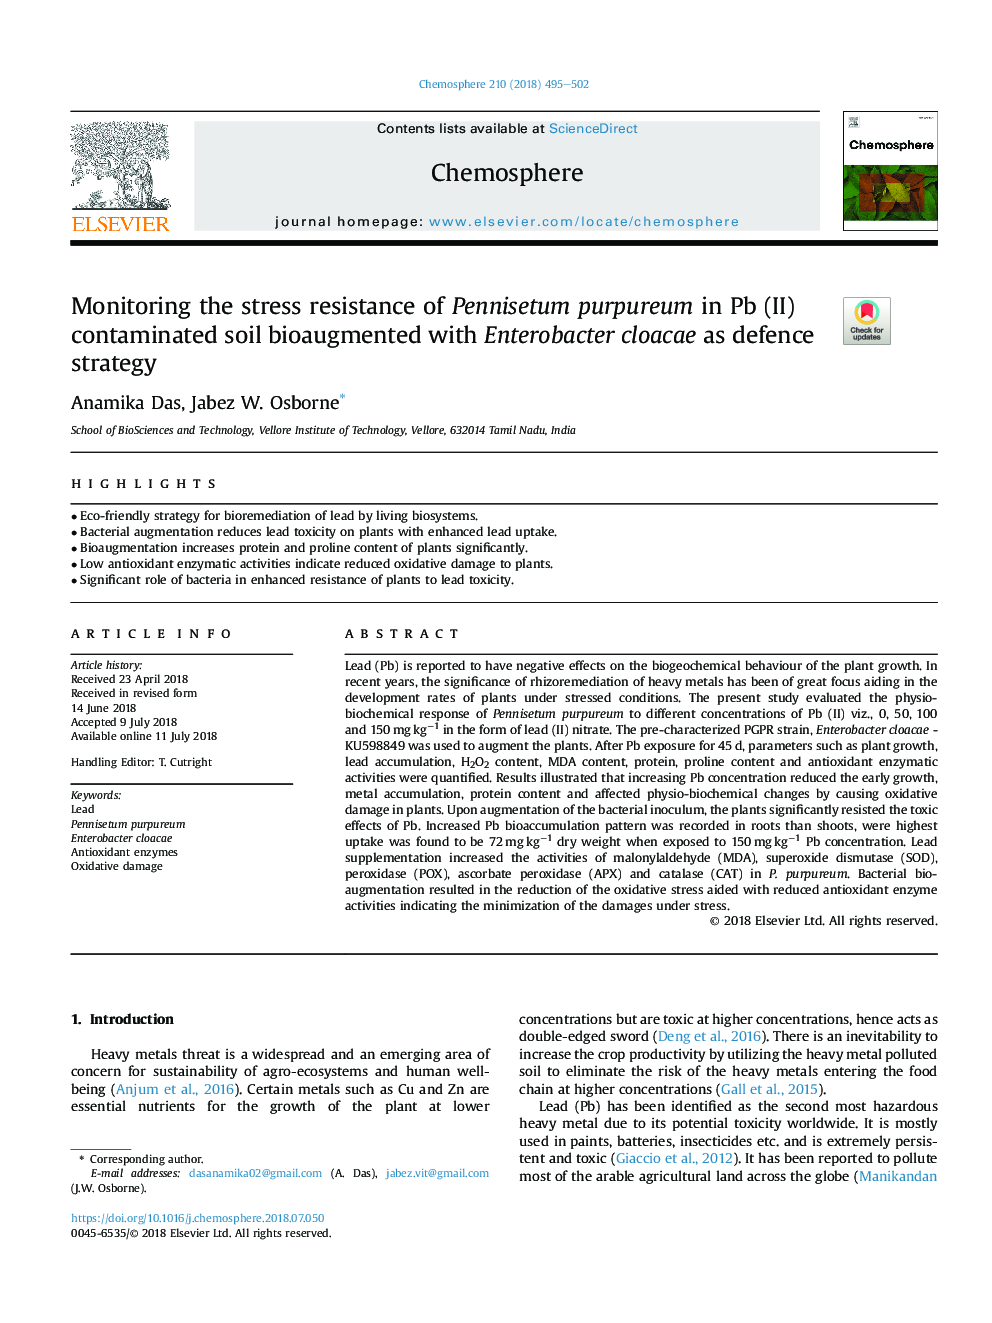 Monitoring the stress resistance of Pennisetum purpureum in Pb (II) contaminated soil bioaugmented with Enterobacter cloacae as defence strategy